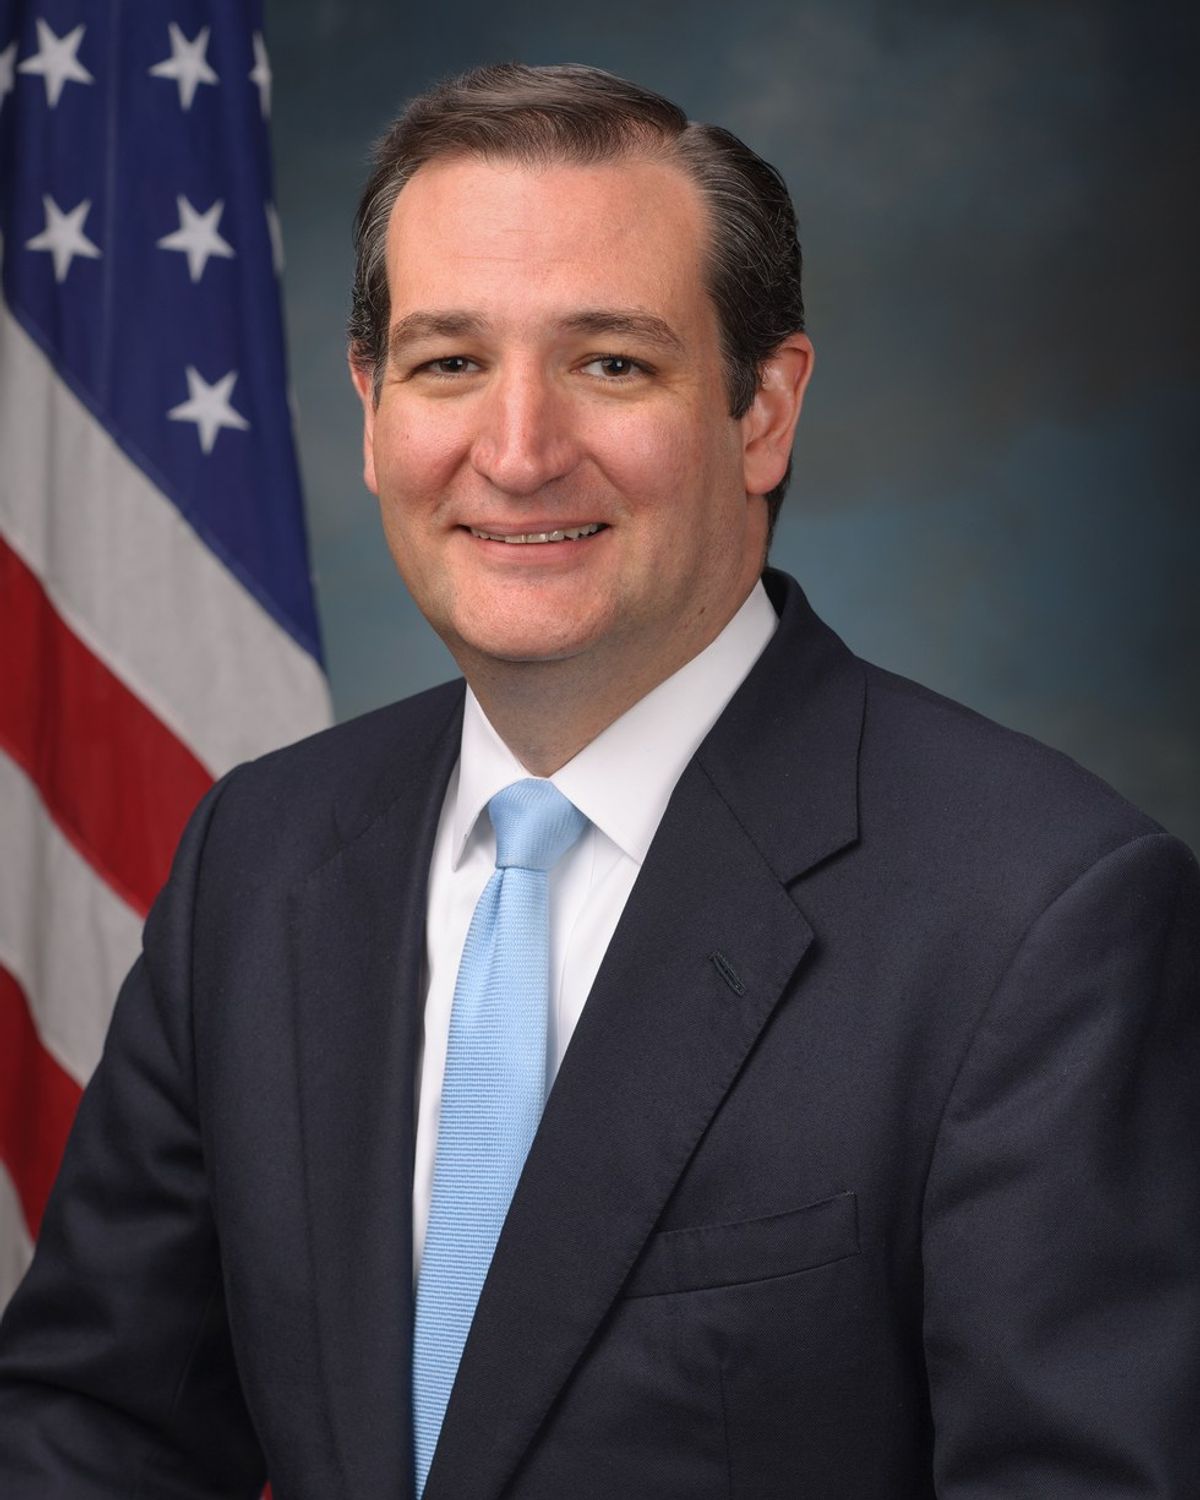 Ted Cruz: Who will he vote for?